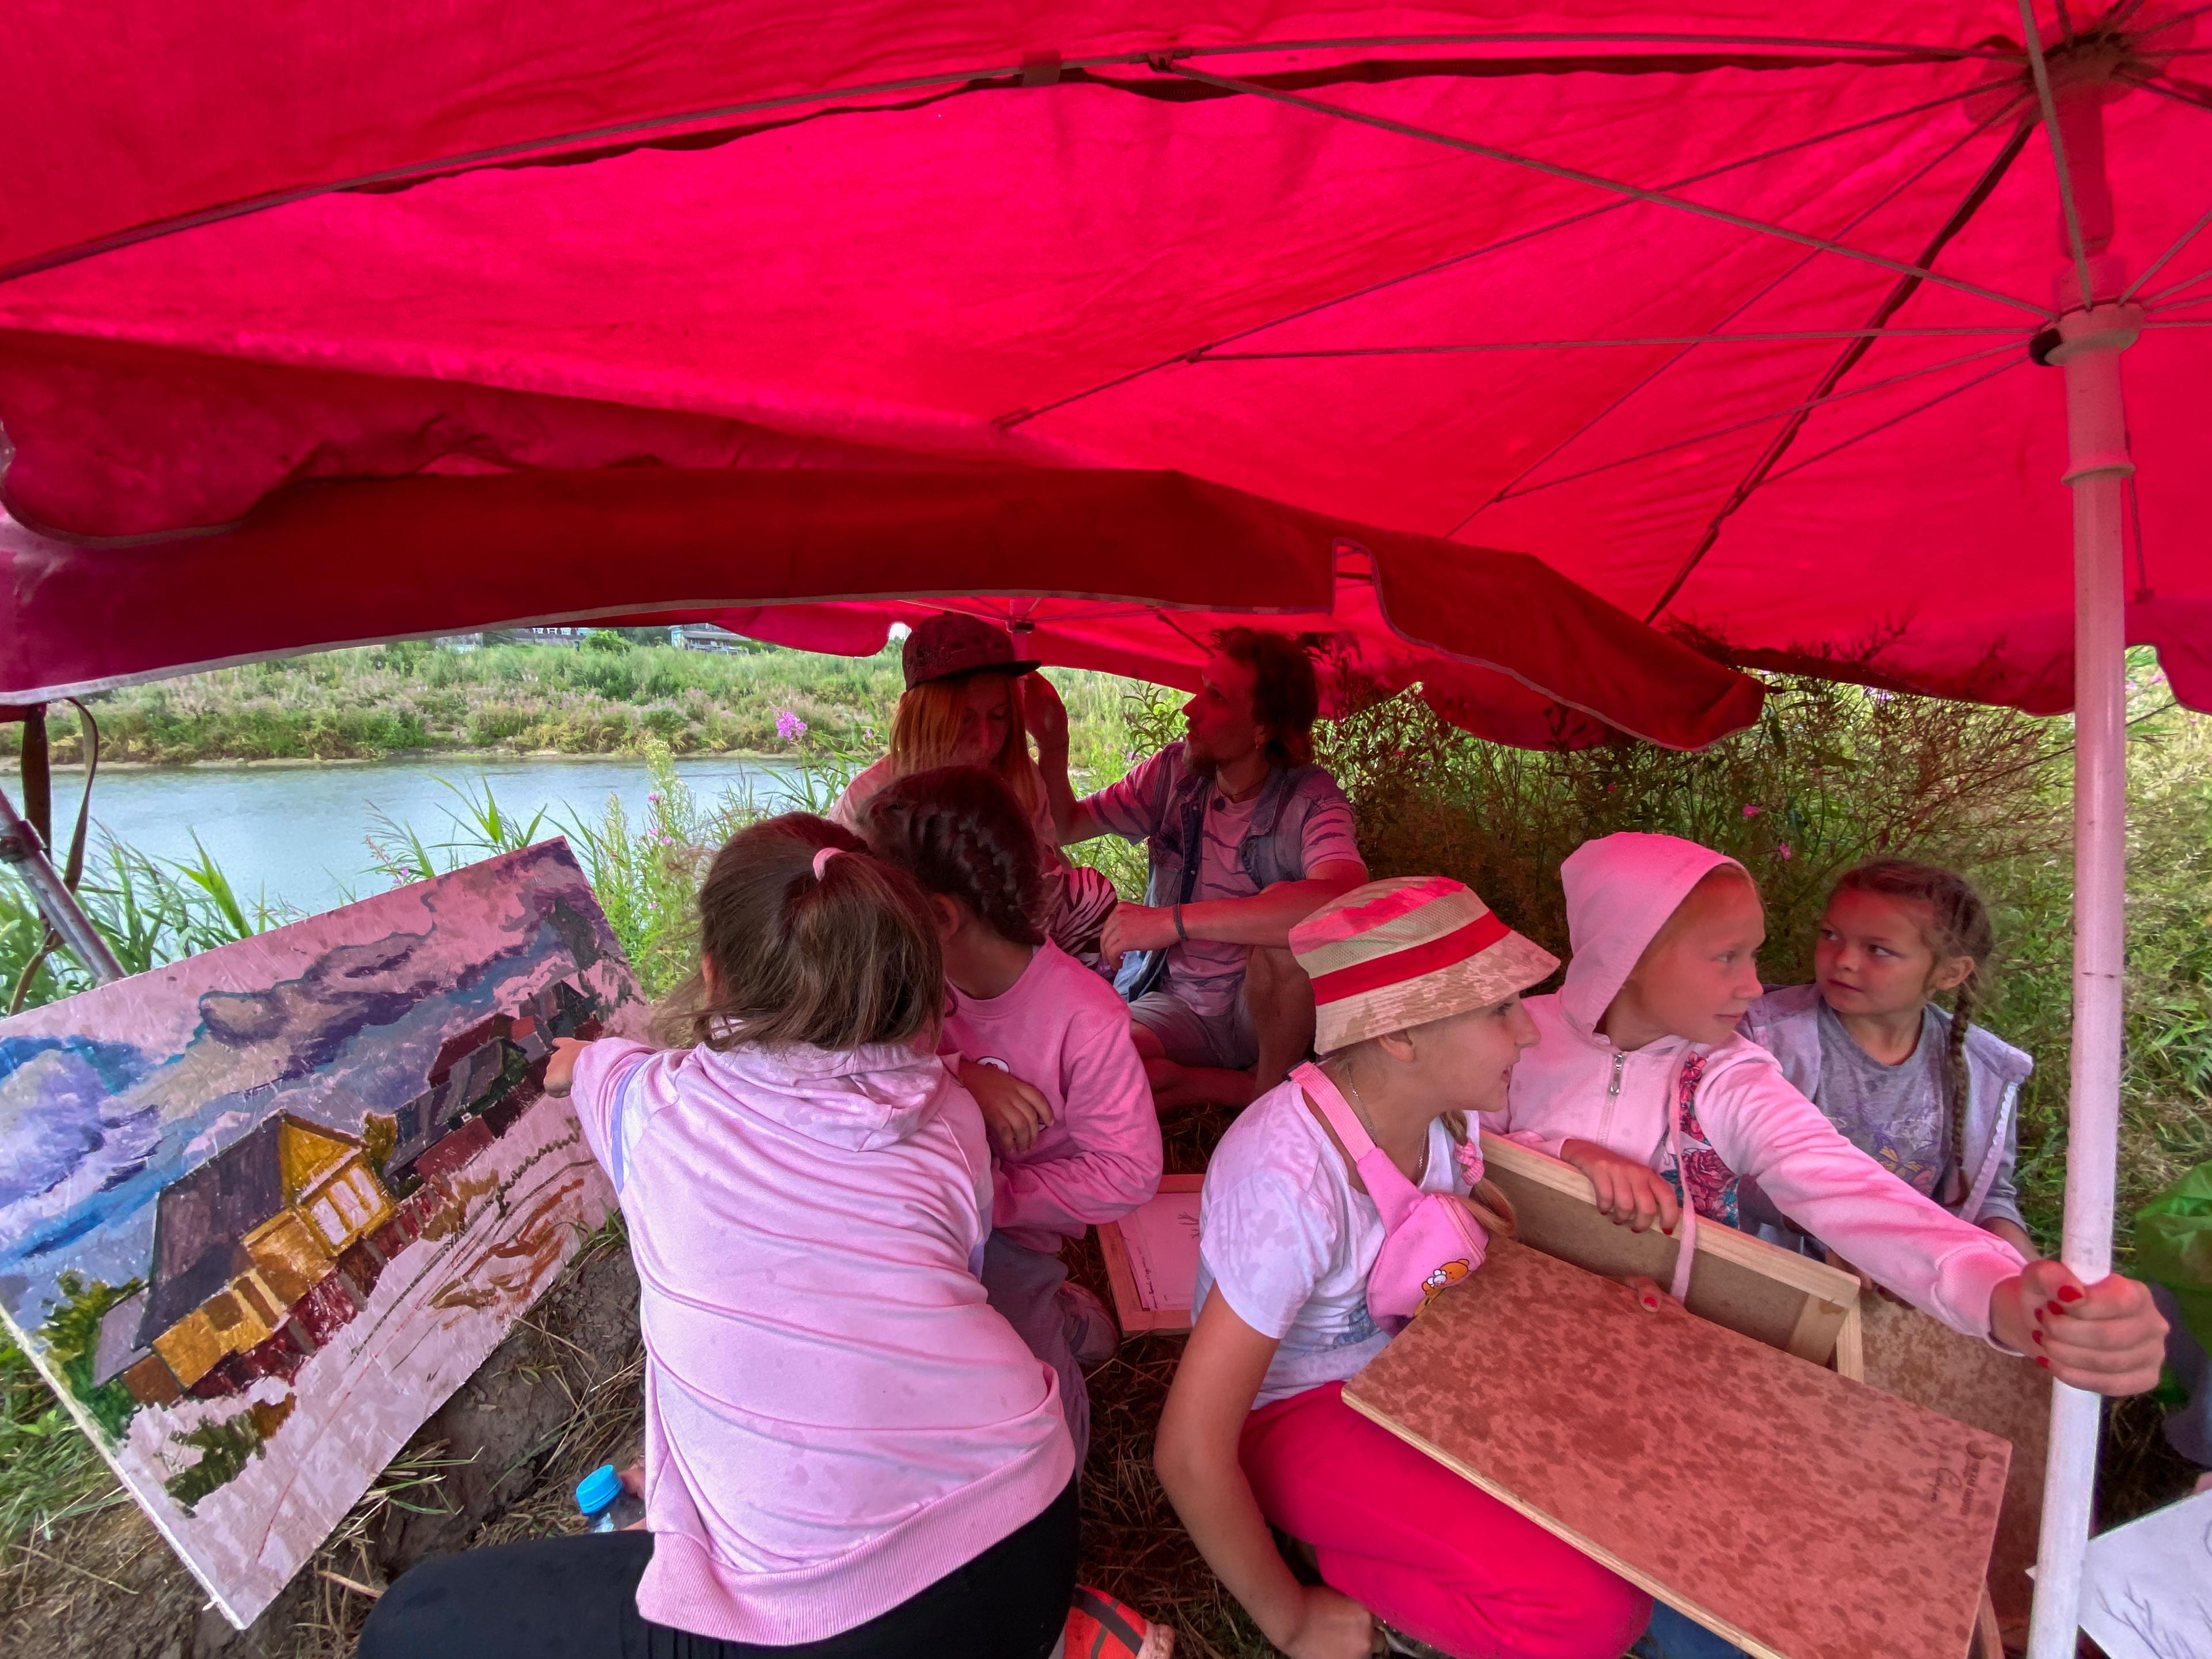 A group of children are sitting outdoors, near a pond and underneath a large red umbrella. They have painting material and on the left is a half finished painting of the landscape. 